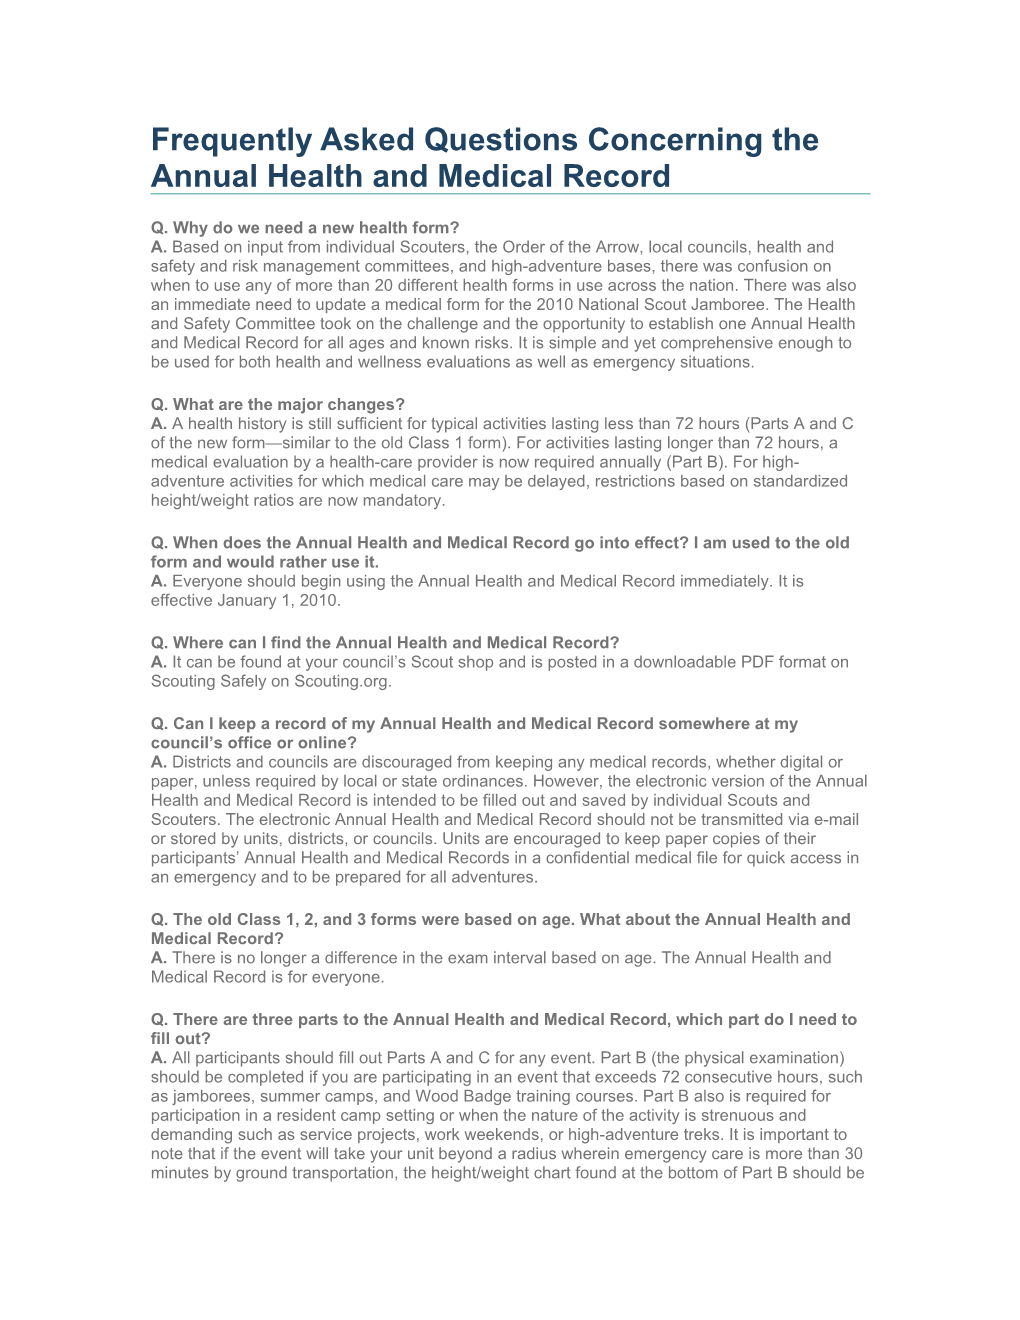 Frequently Asked Questions Concerning the Annual Health and Medical Record